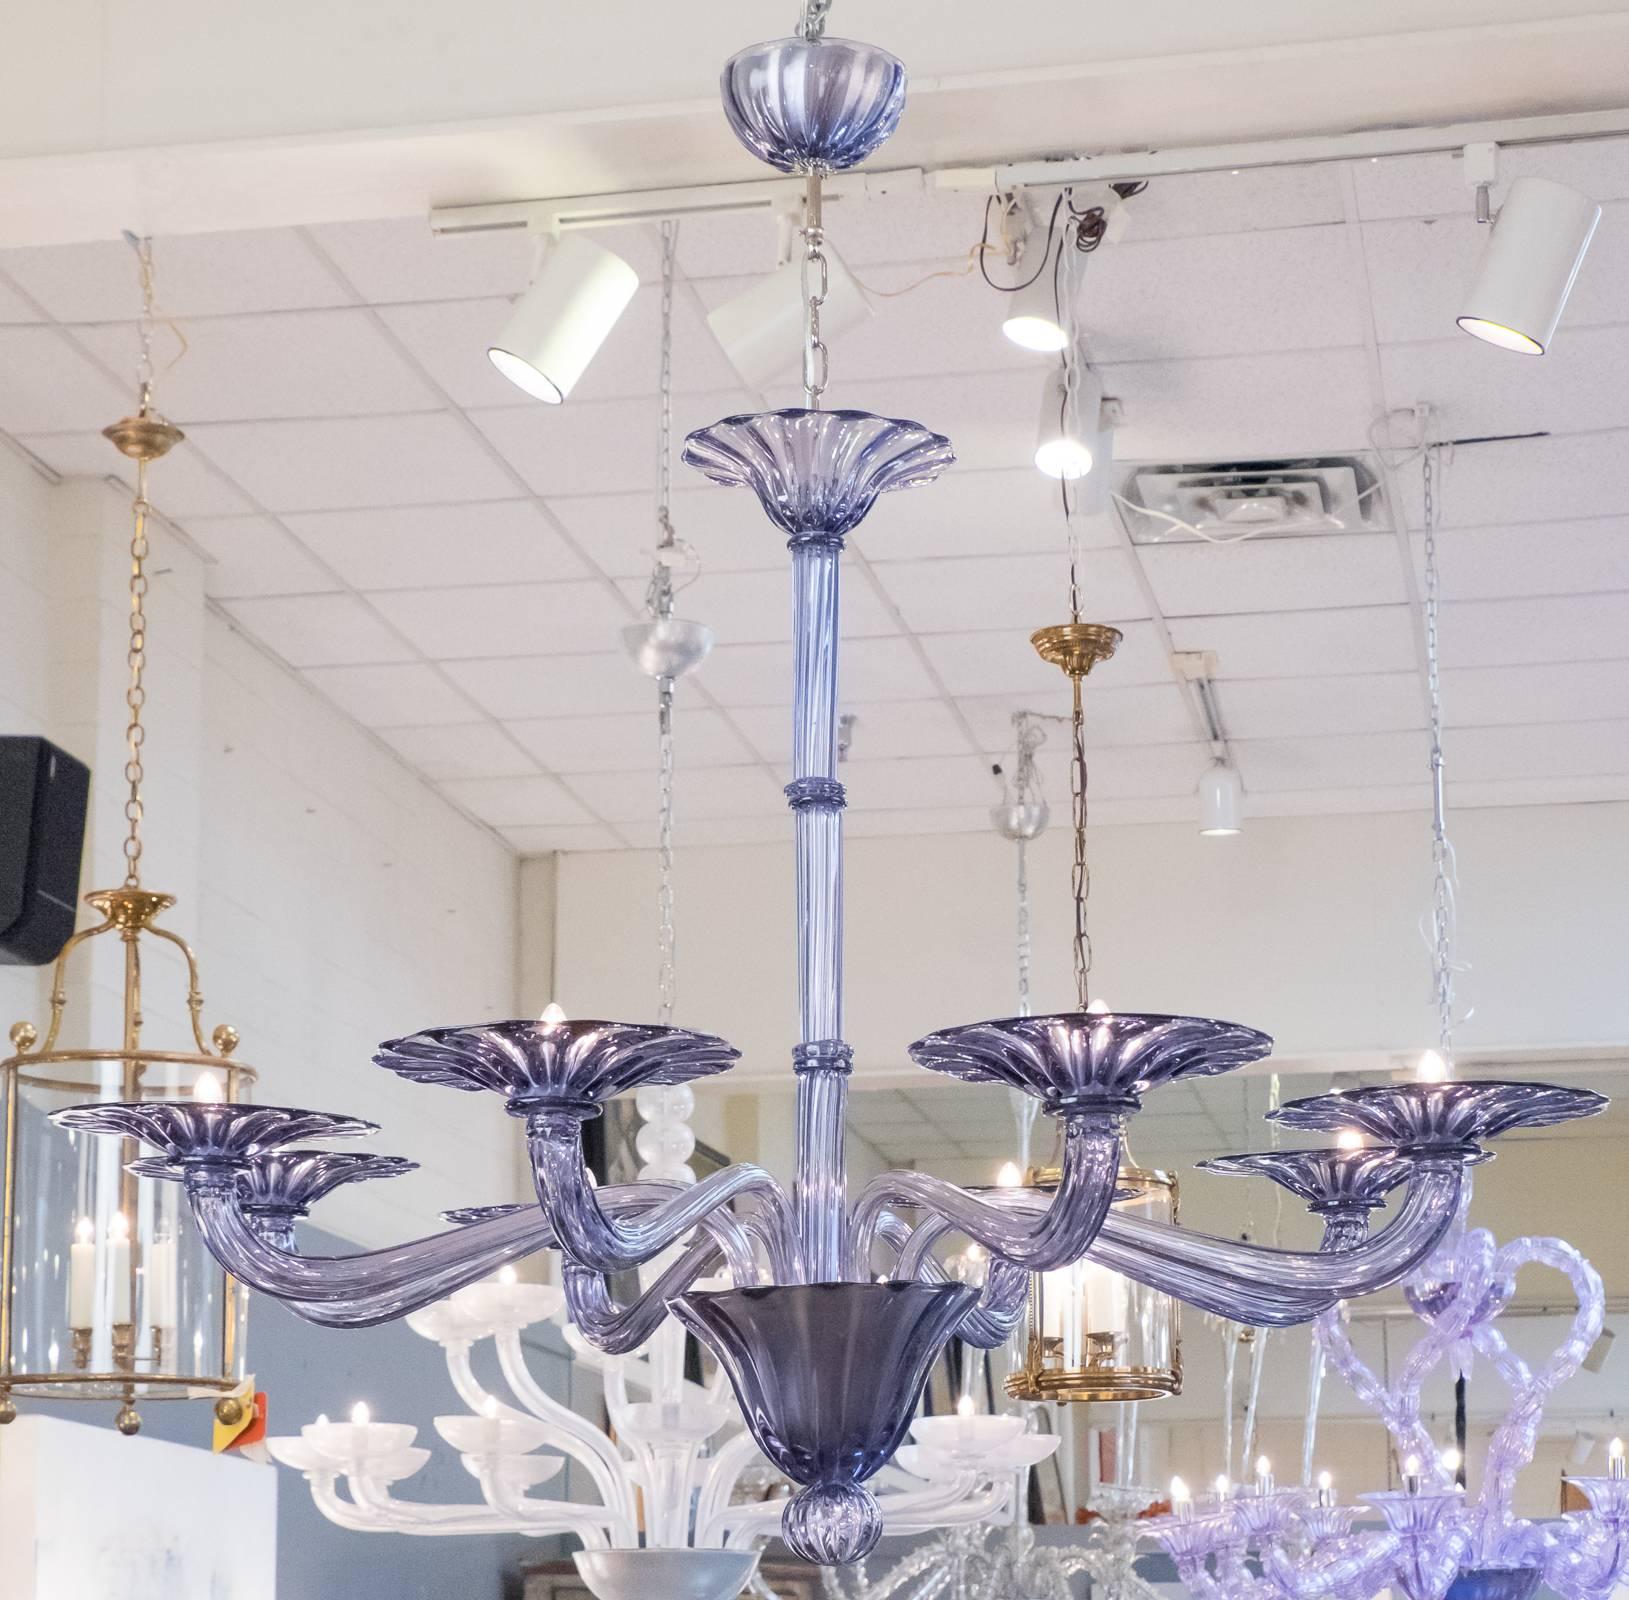 Sumptuous handblown Murano glass chandelier in light purple with eight branches, the perfect combination of Classic craftsmanship and modernity.
The height including the chain and second canopy is 49.25